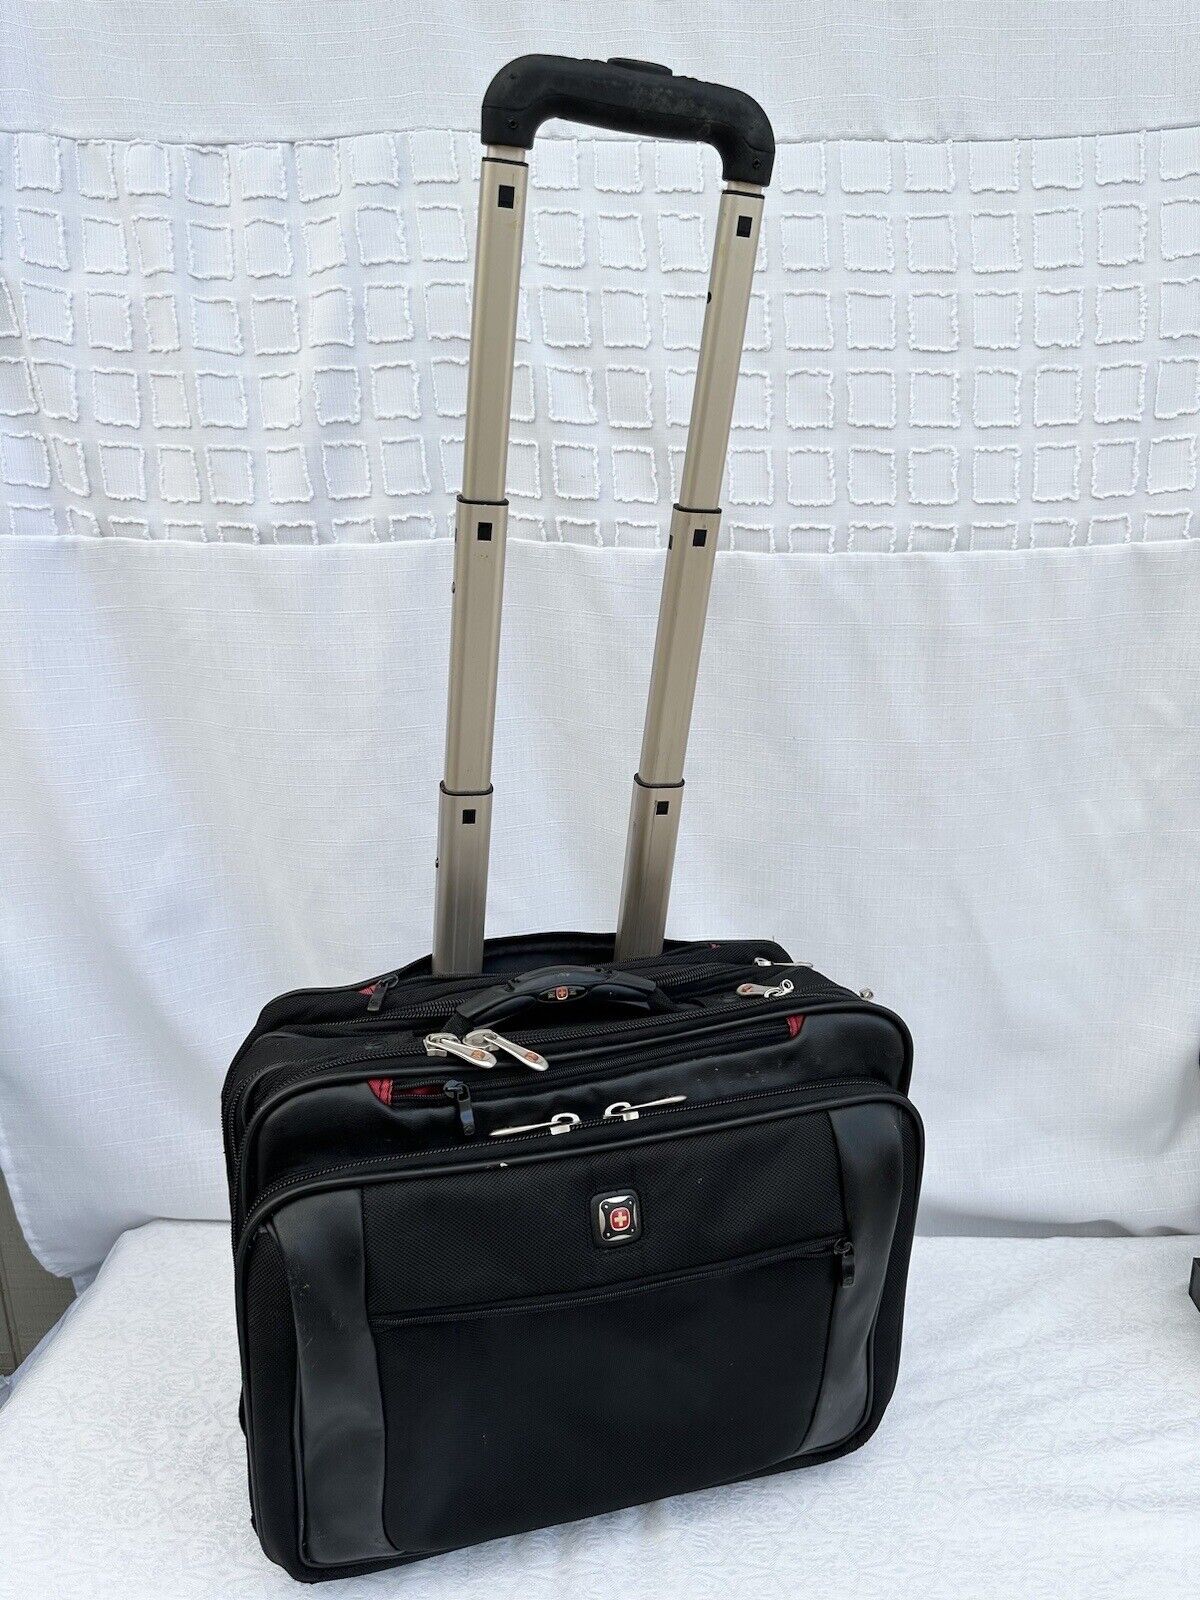 SWISSGEAR Wenger Patriot Rolling 1 Piece Business Bag Luggage Black Rolling